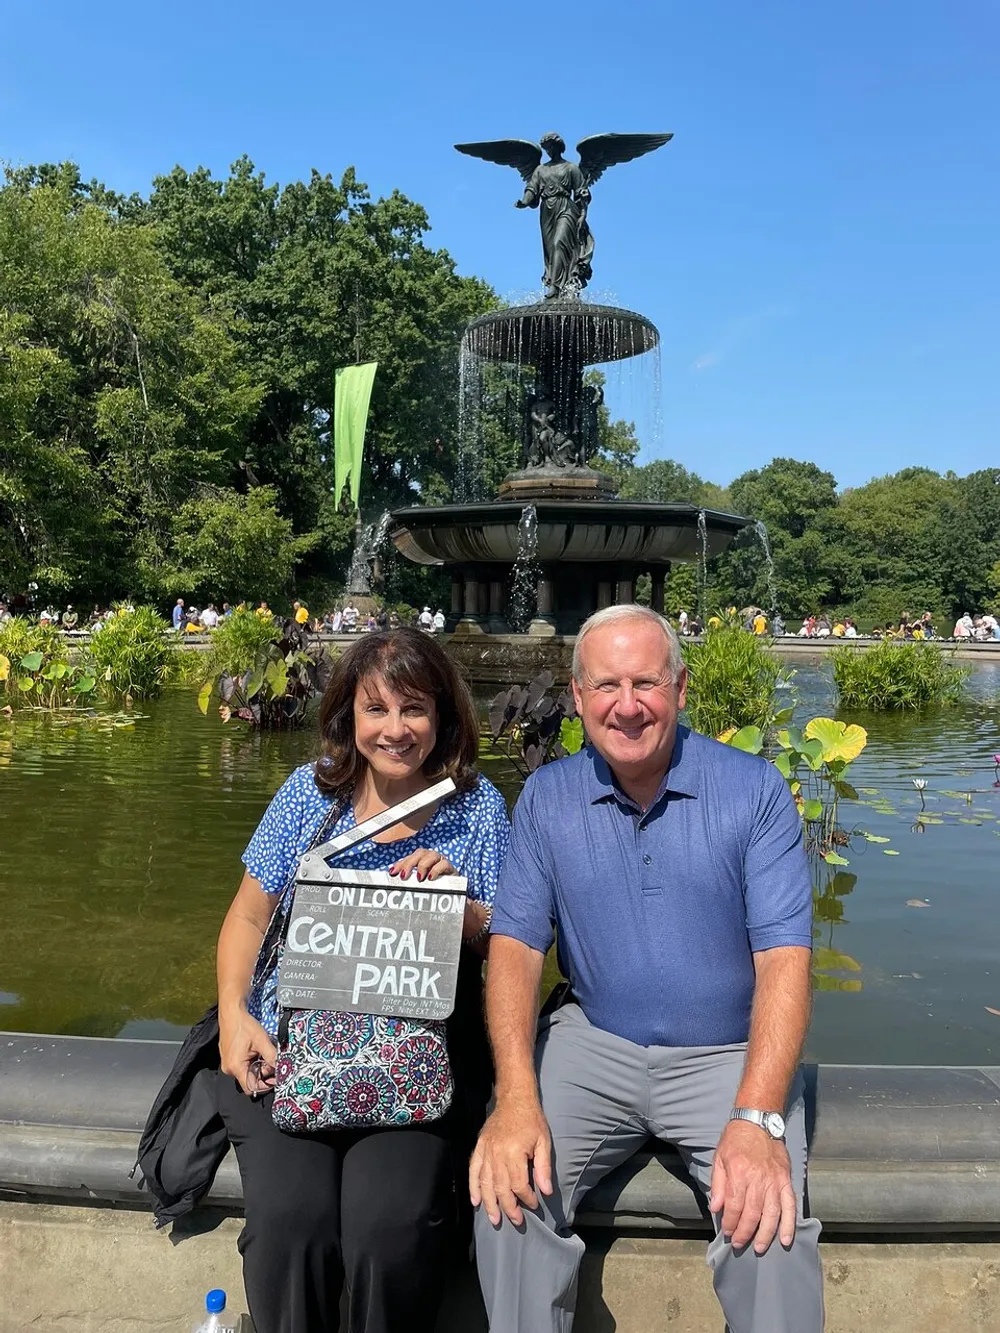 A smiling man and woman pose in front of the Bethesda Fountain in Central Park with the woman holding a sign that reads On Location Central Park